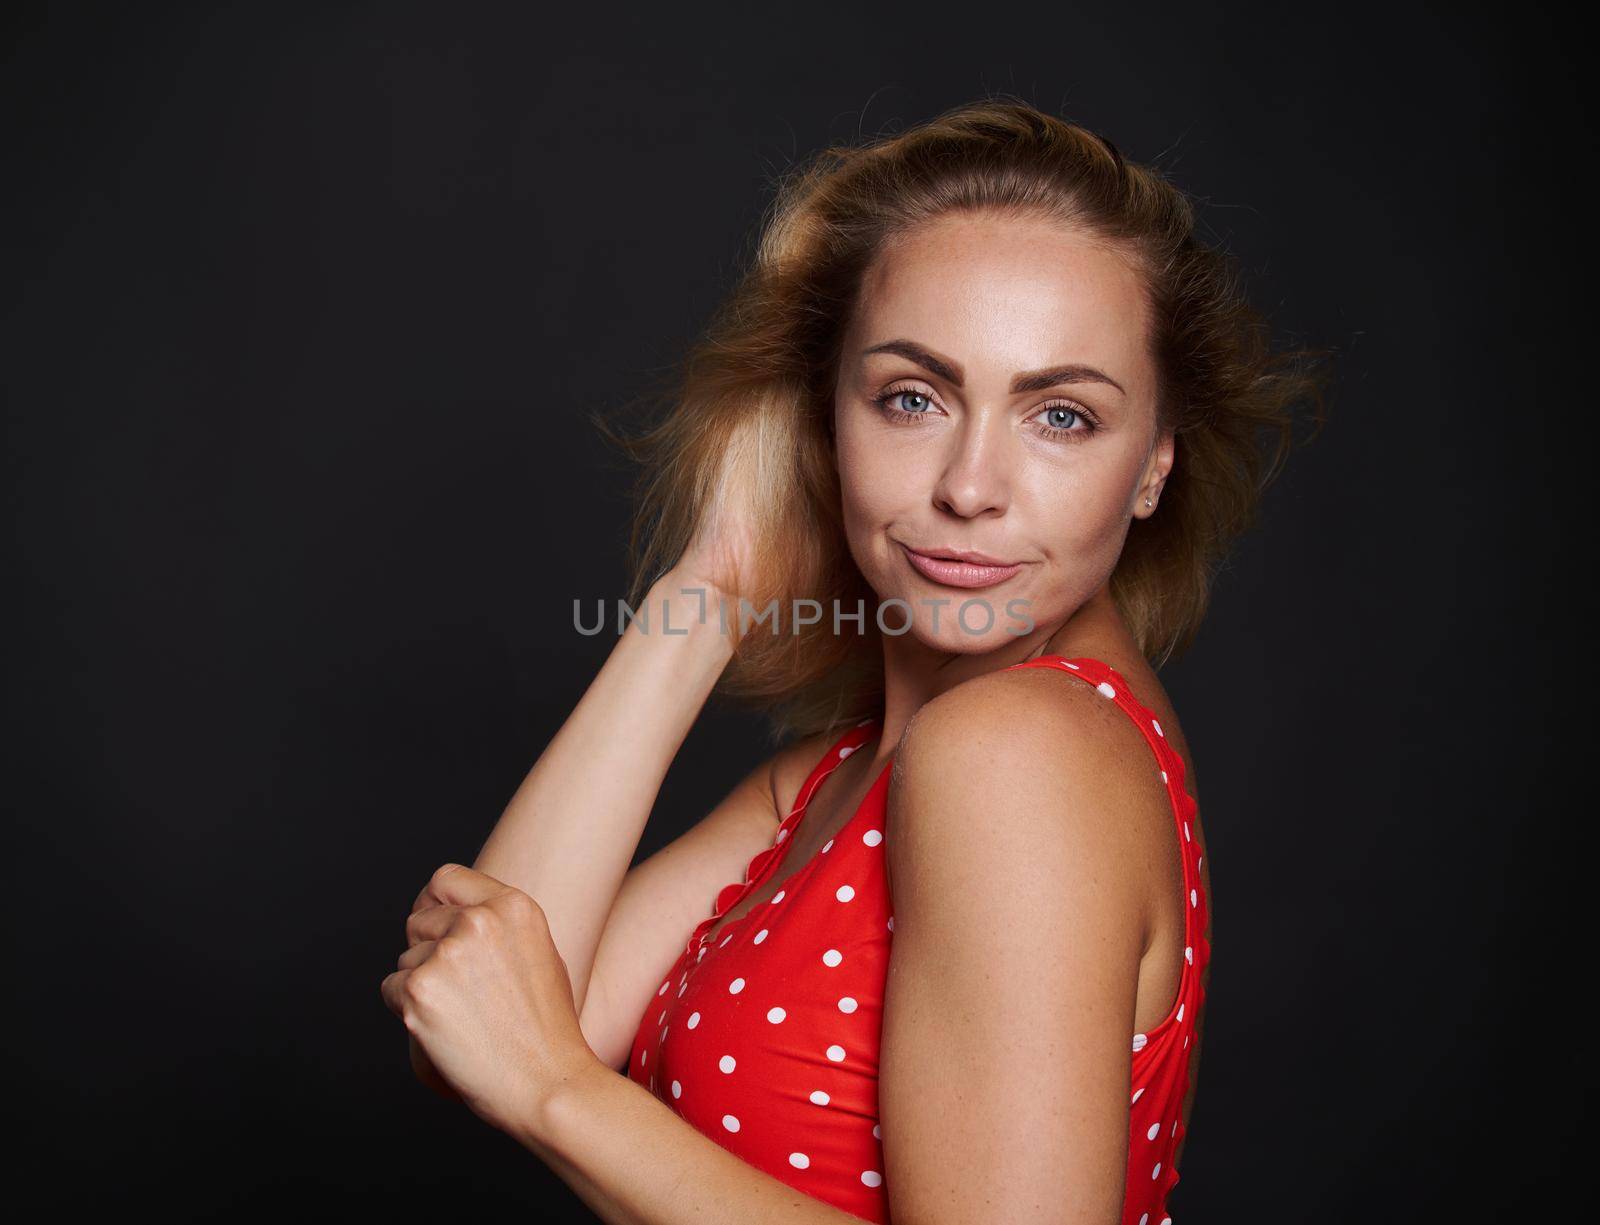 Beautiful middle aged blonde sporty European woman in red swimsuit with white polka dots confidently looking at camera isolated over black background with copy ad space by artgf